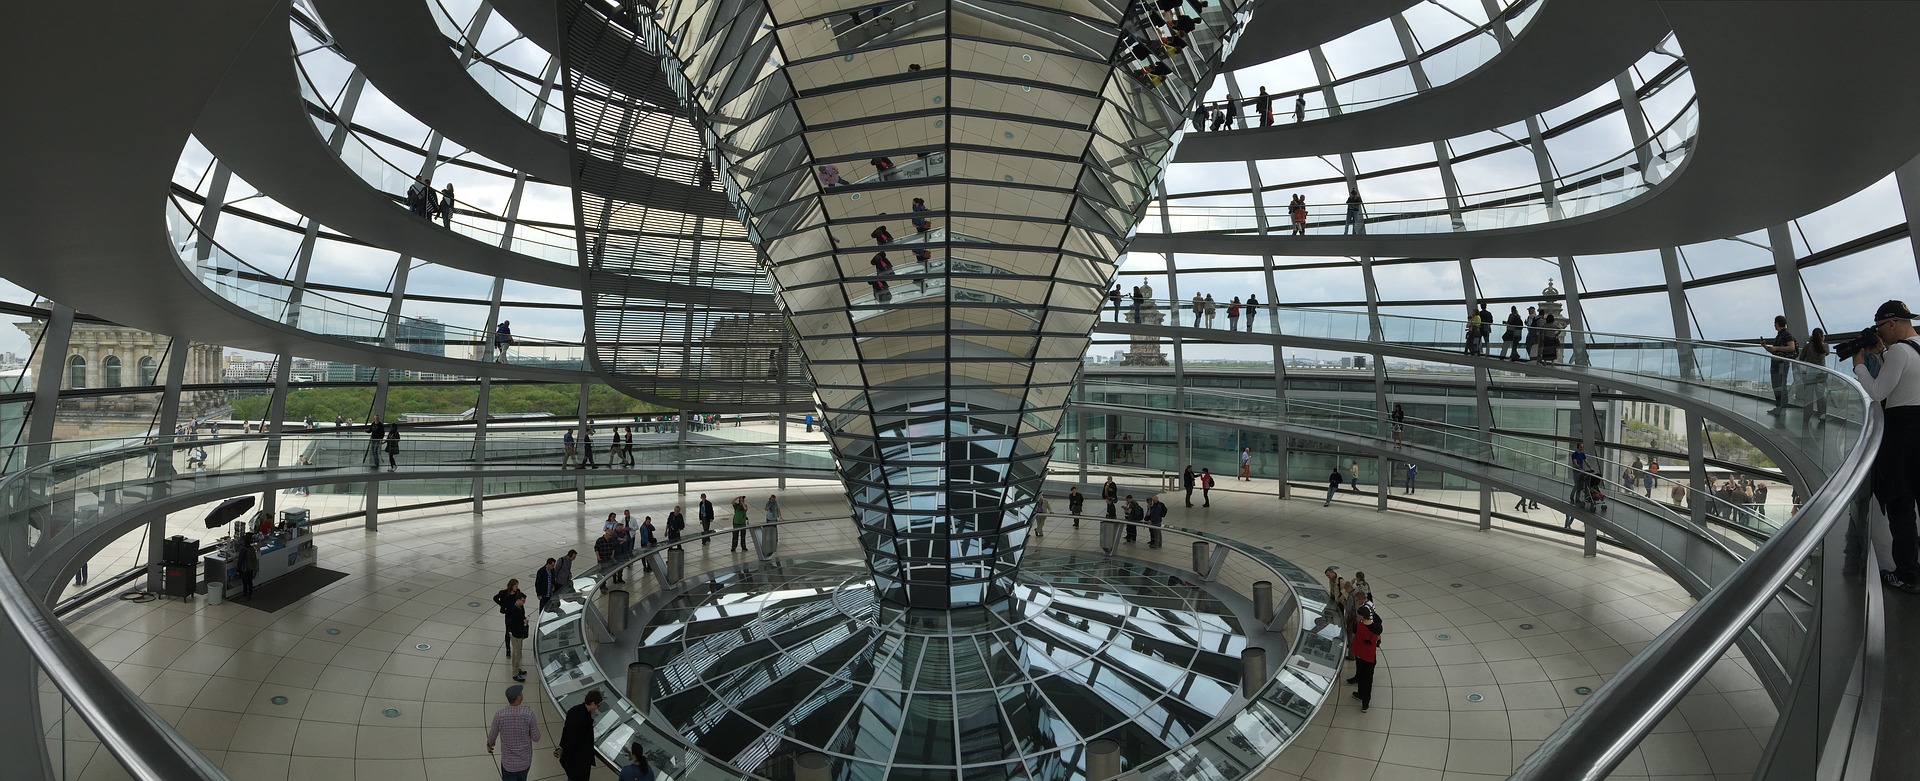 The Reichstag dome, Berlin, Germany